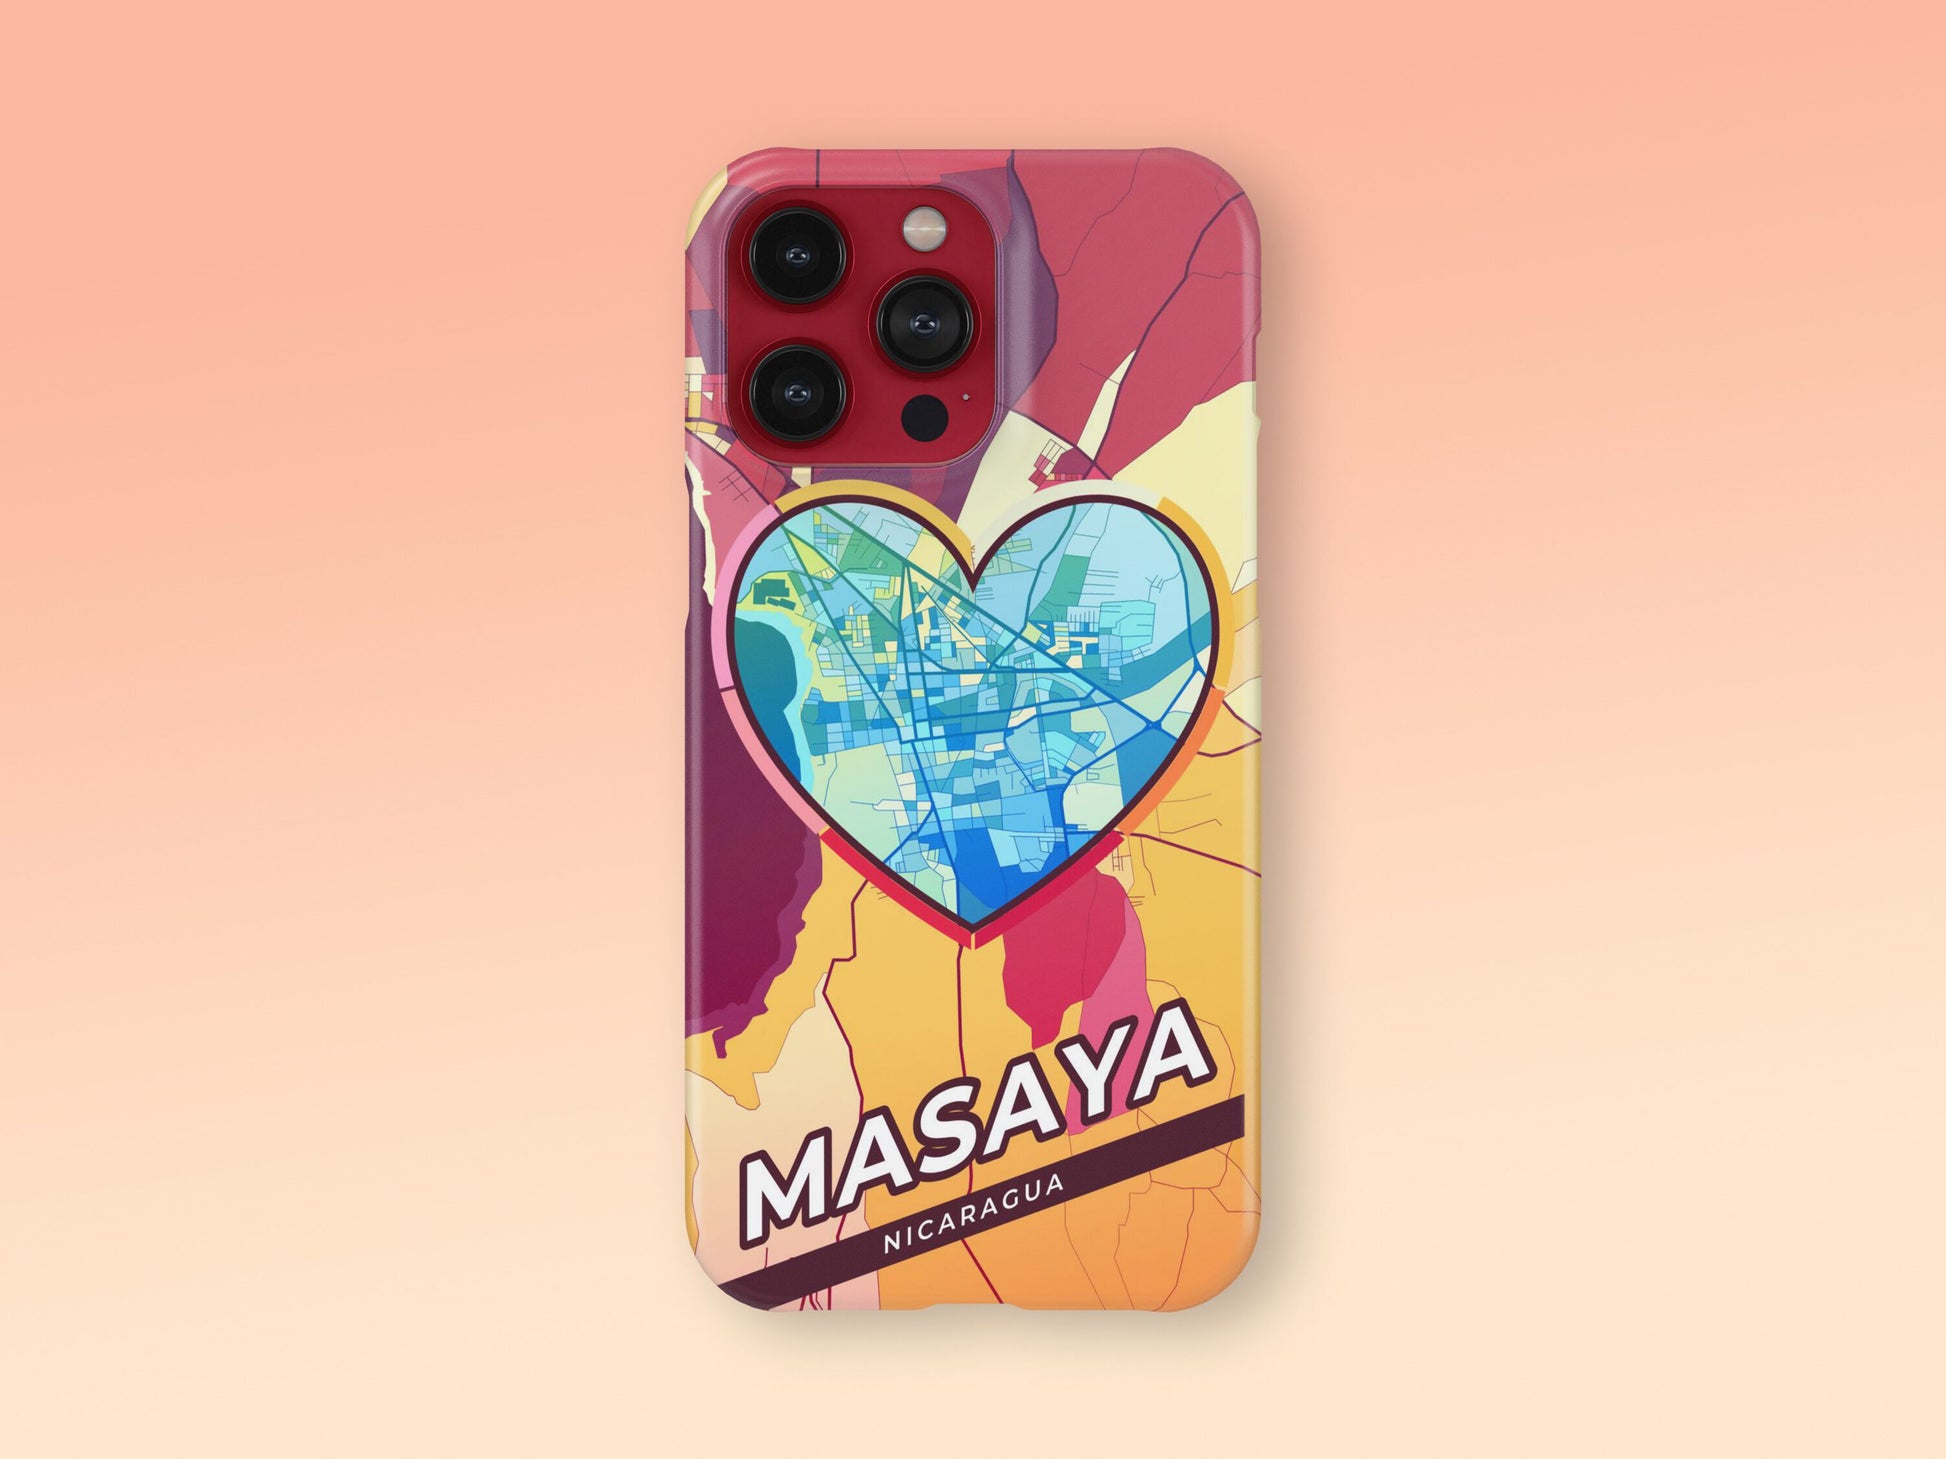 Masaya Nicaragua slim phone case with colorful icon. Birthday, wedding or housewarming gift. Couple match cases. 2